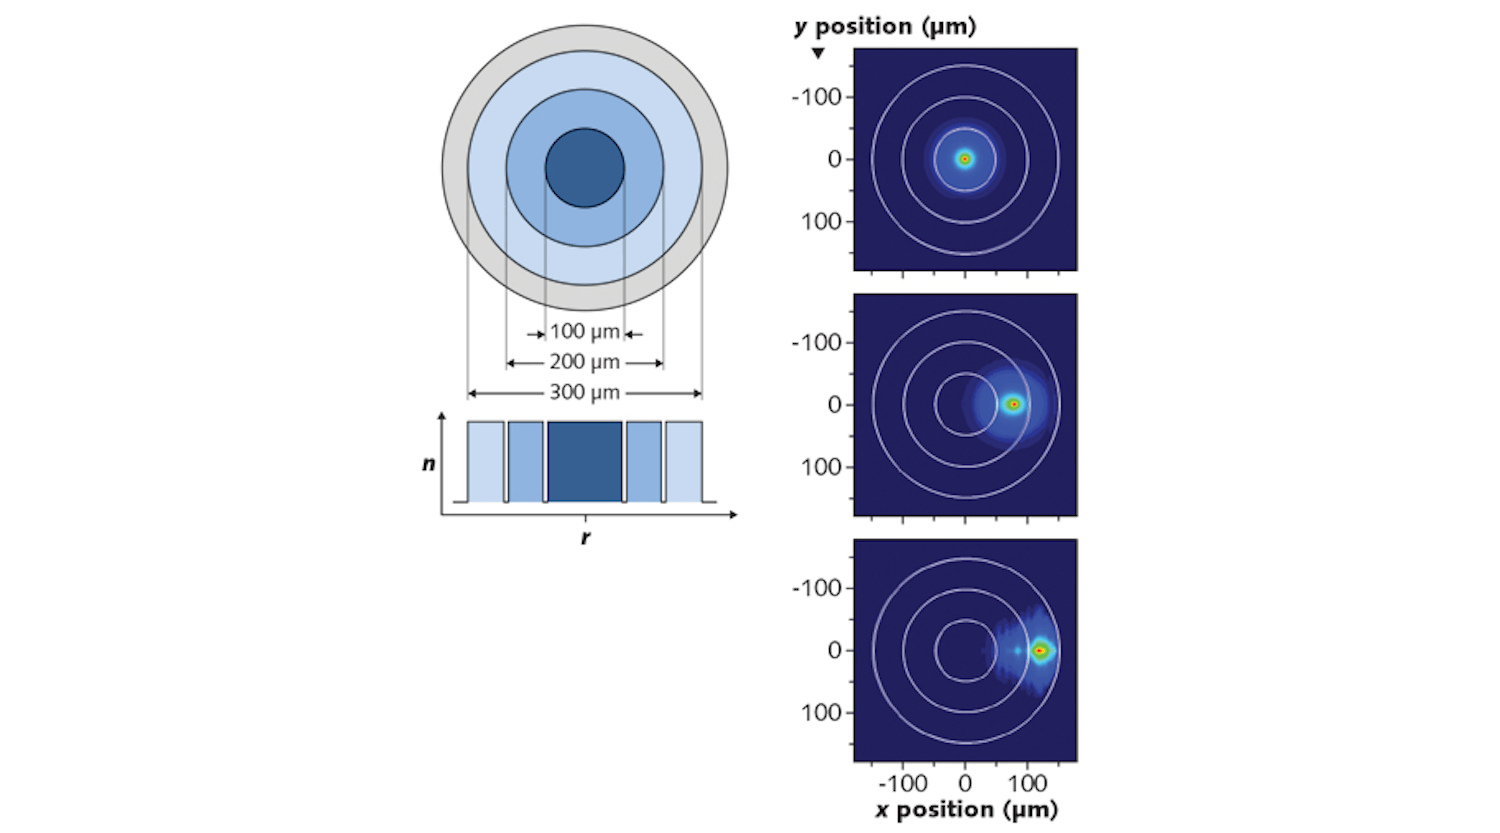 FIGURE 1. Shown at left is the fiber cross-section (top) and refractive index profile (bottom) for a feeding fiber with three guiding regions. Simulations (right) show the beam profile coupled into the guiding regions for different perturbation conditions. The beam homogenizes azimuthally as it propagates in the fiber.